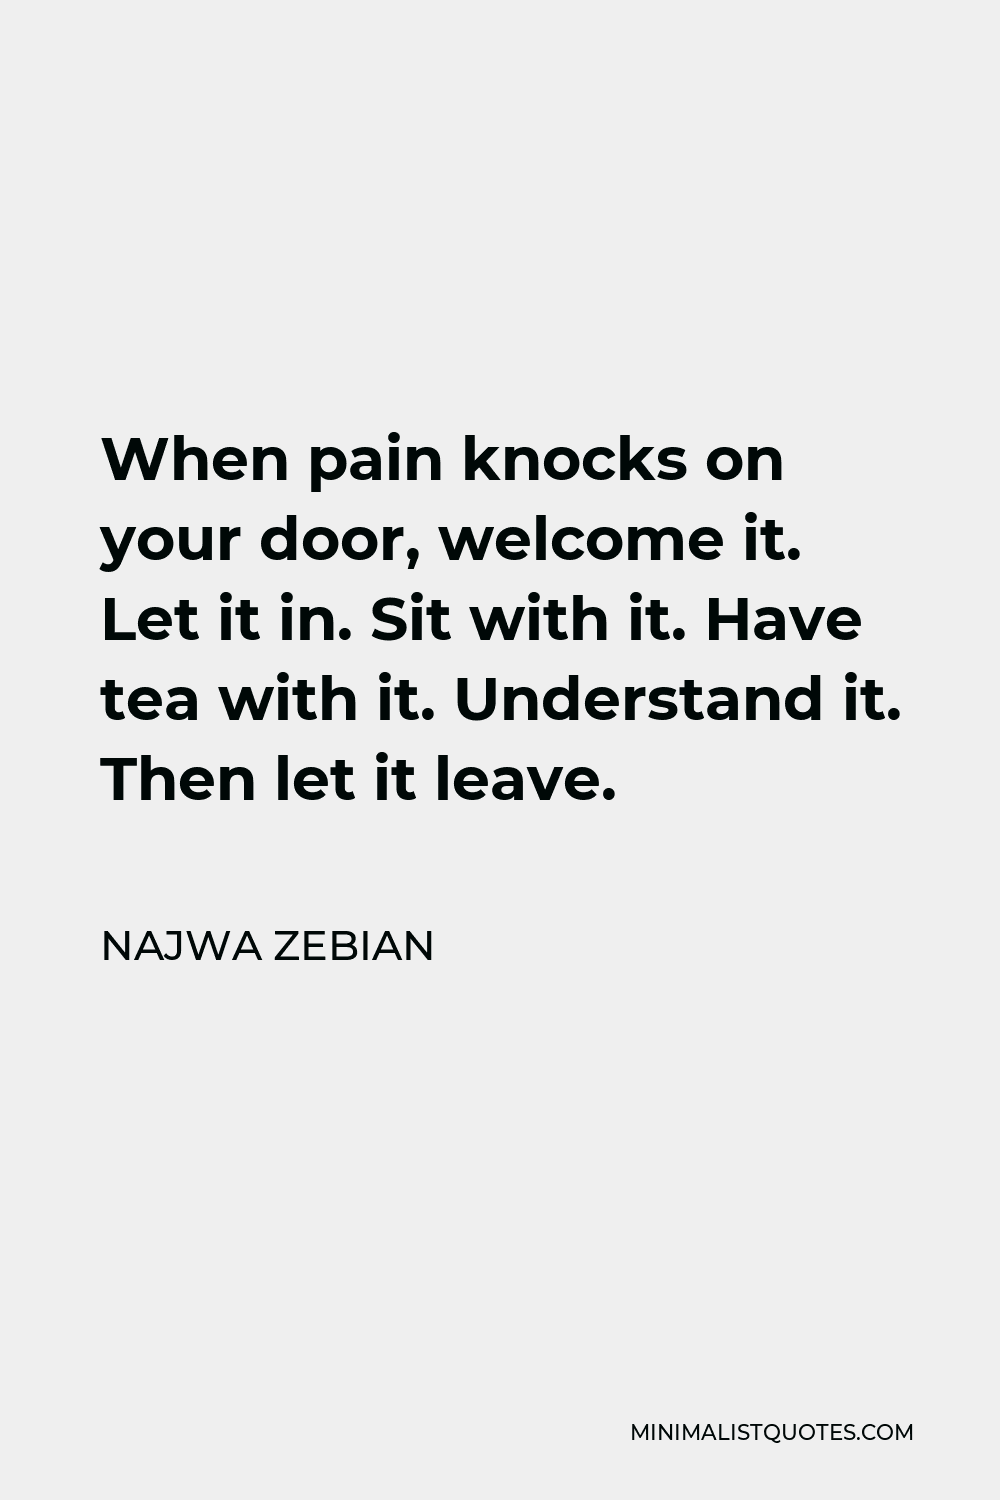 Najwa Zebian Quote - When pain knocks on your door, welcome it. Let it in. Sit with it. Have tea with it. Understand it. Then let it leave.